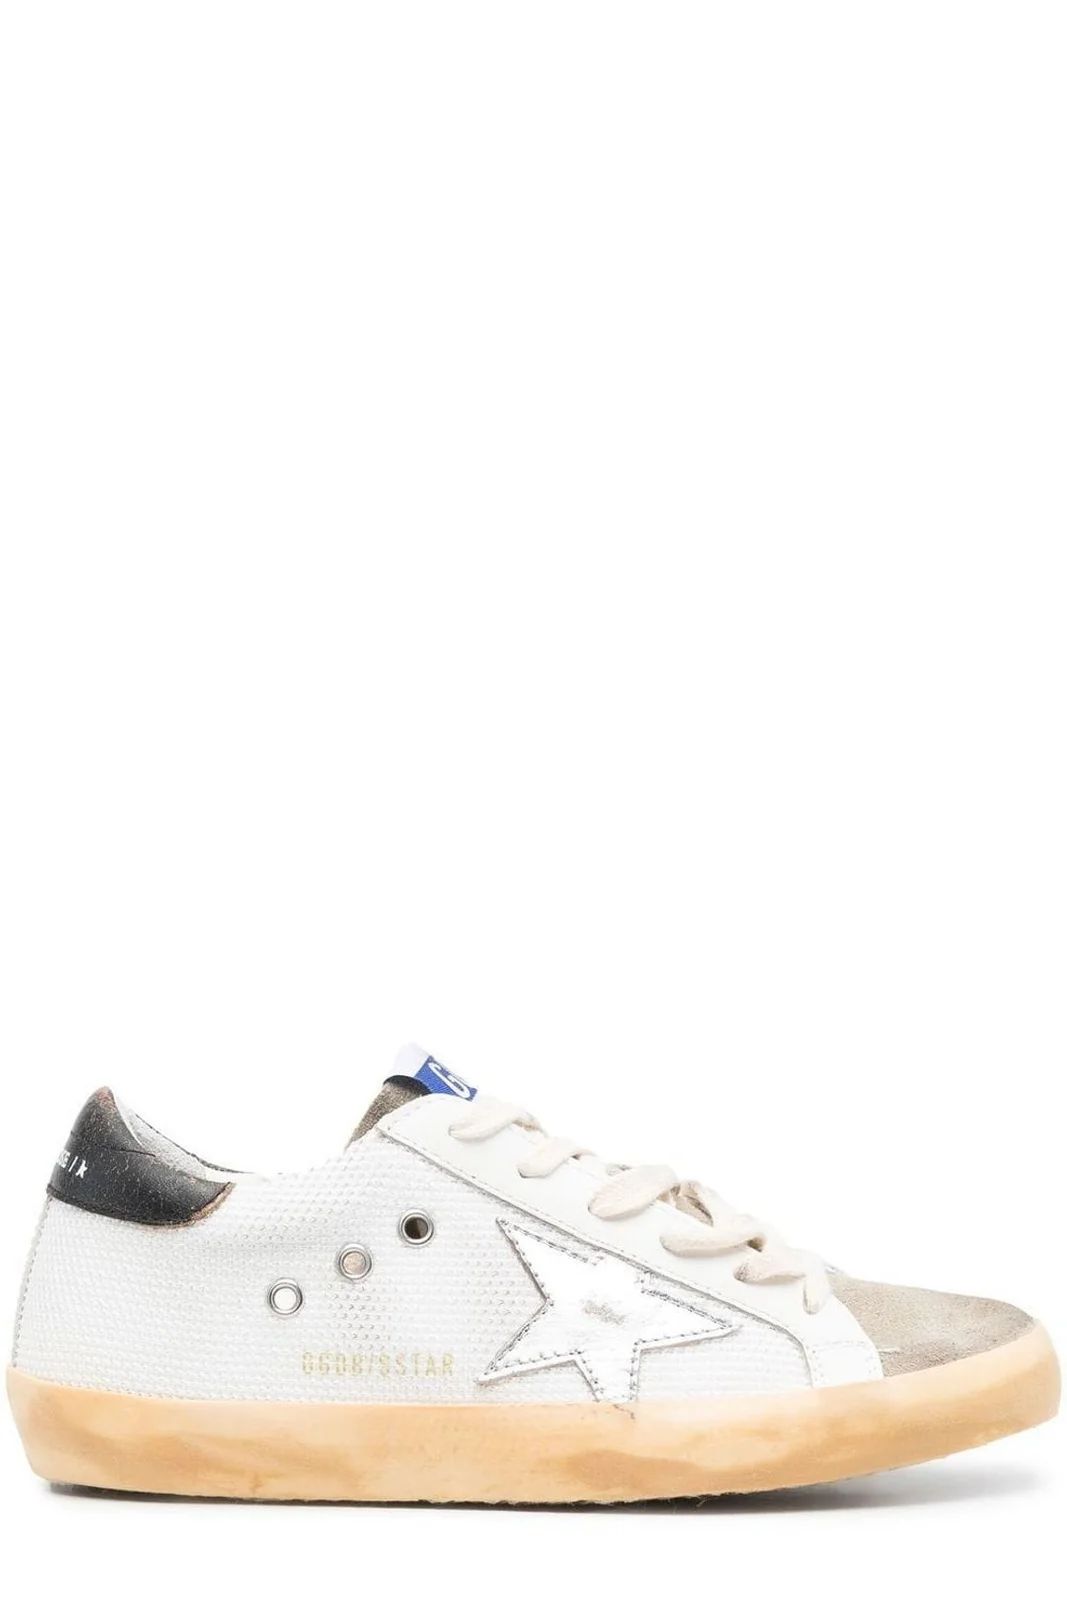 Golden Goose Deluxe Brand Super Star Lace-Up Sneakers | Cettire Global